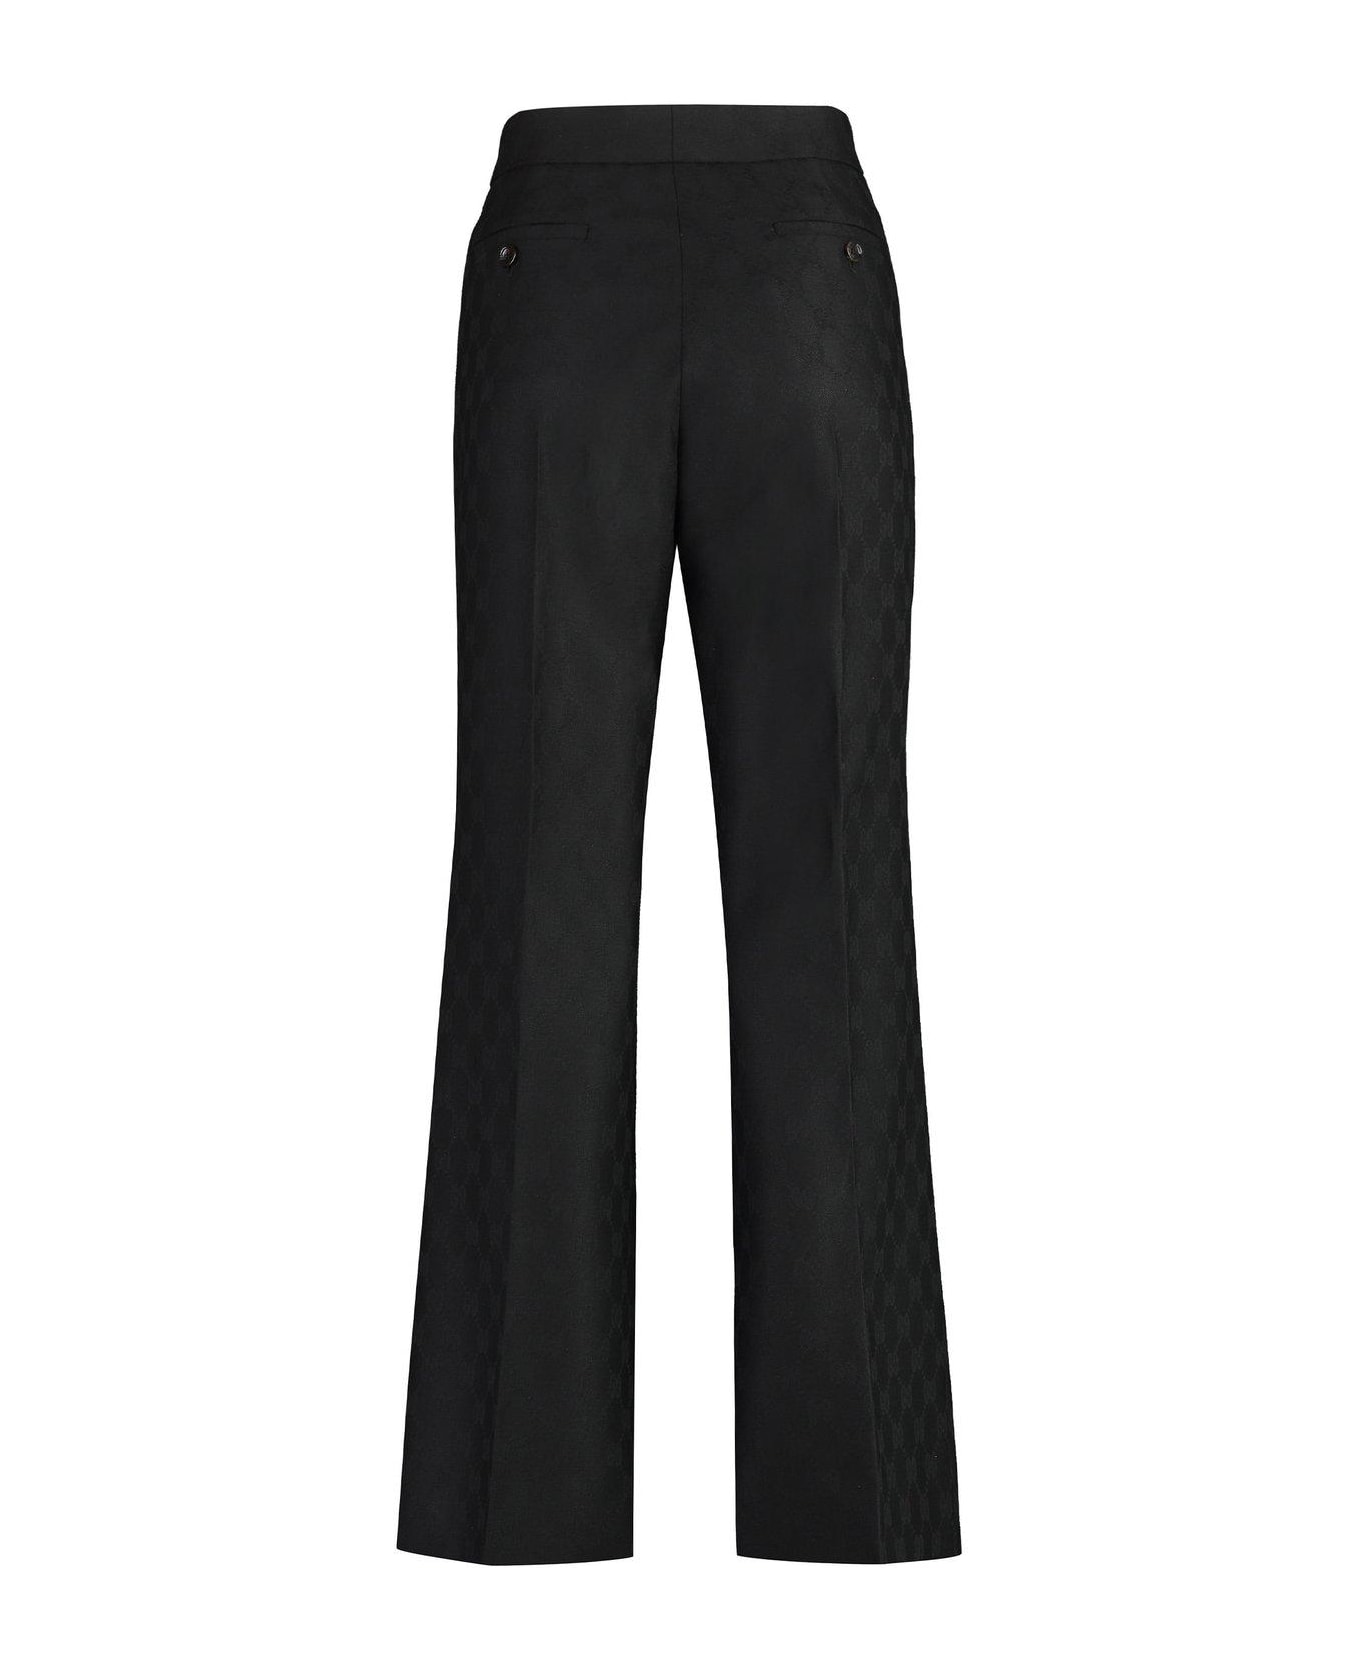 Gucci Gg Jacquard Tailored Trousers - Black ボトムス